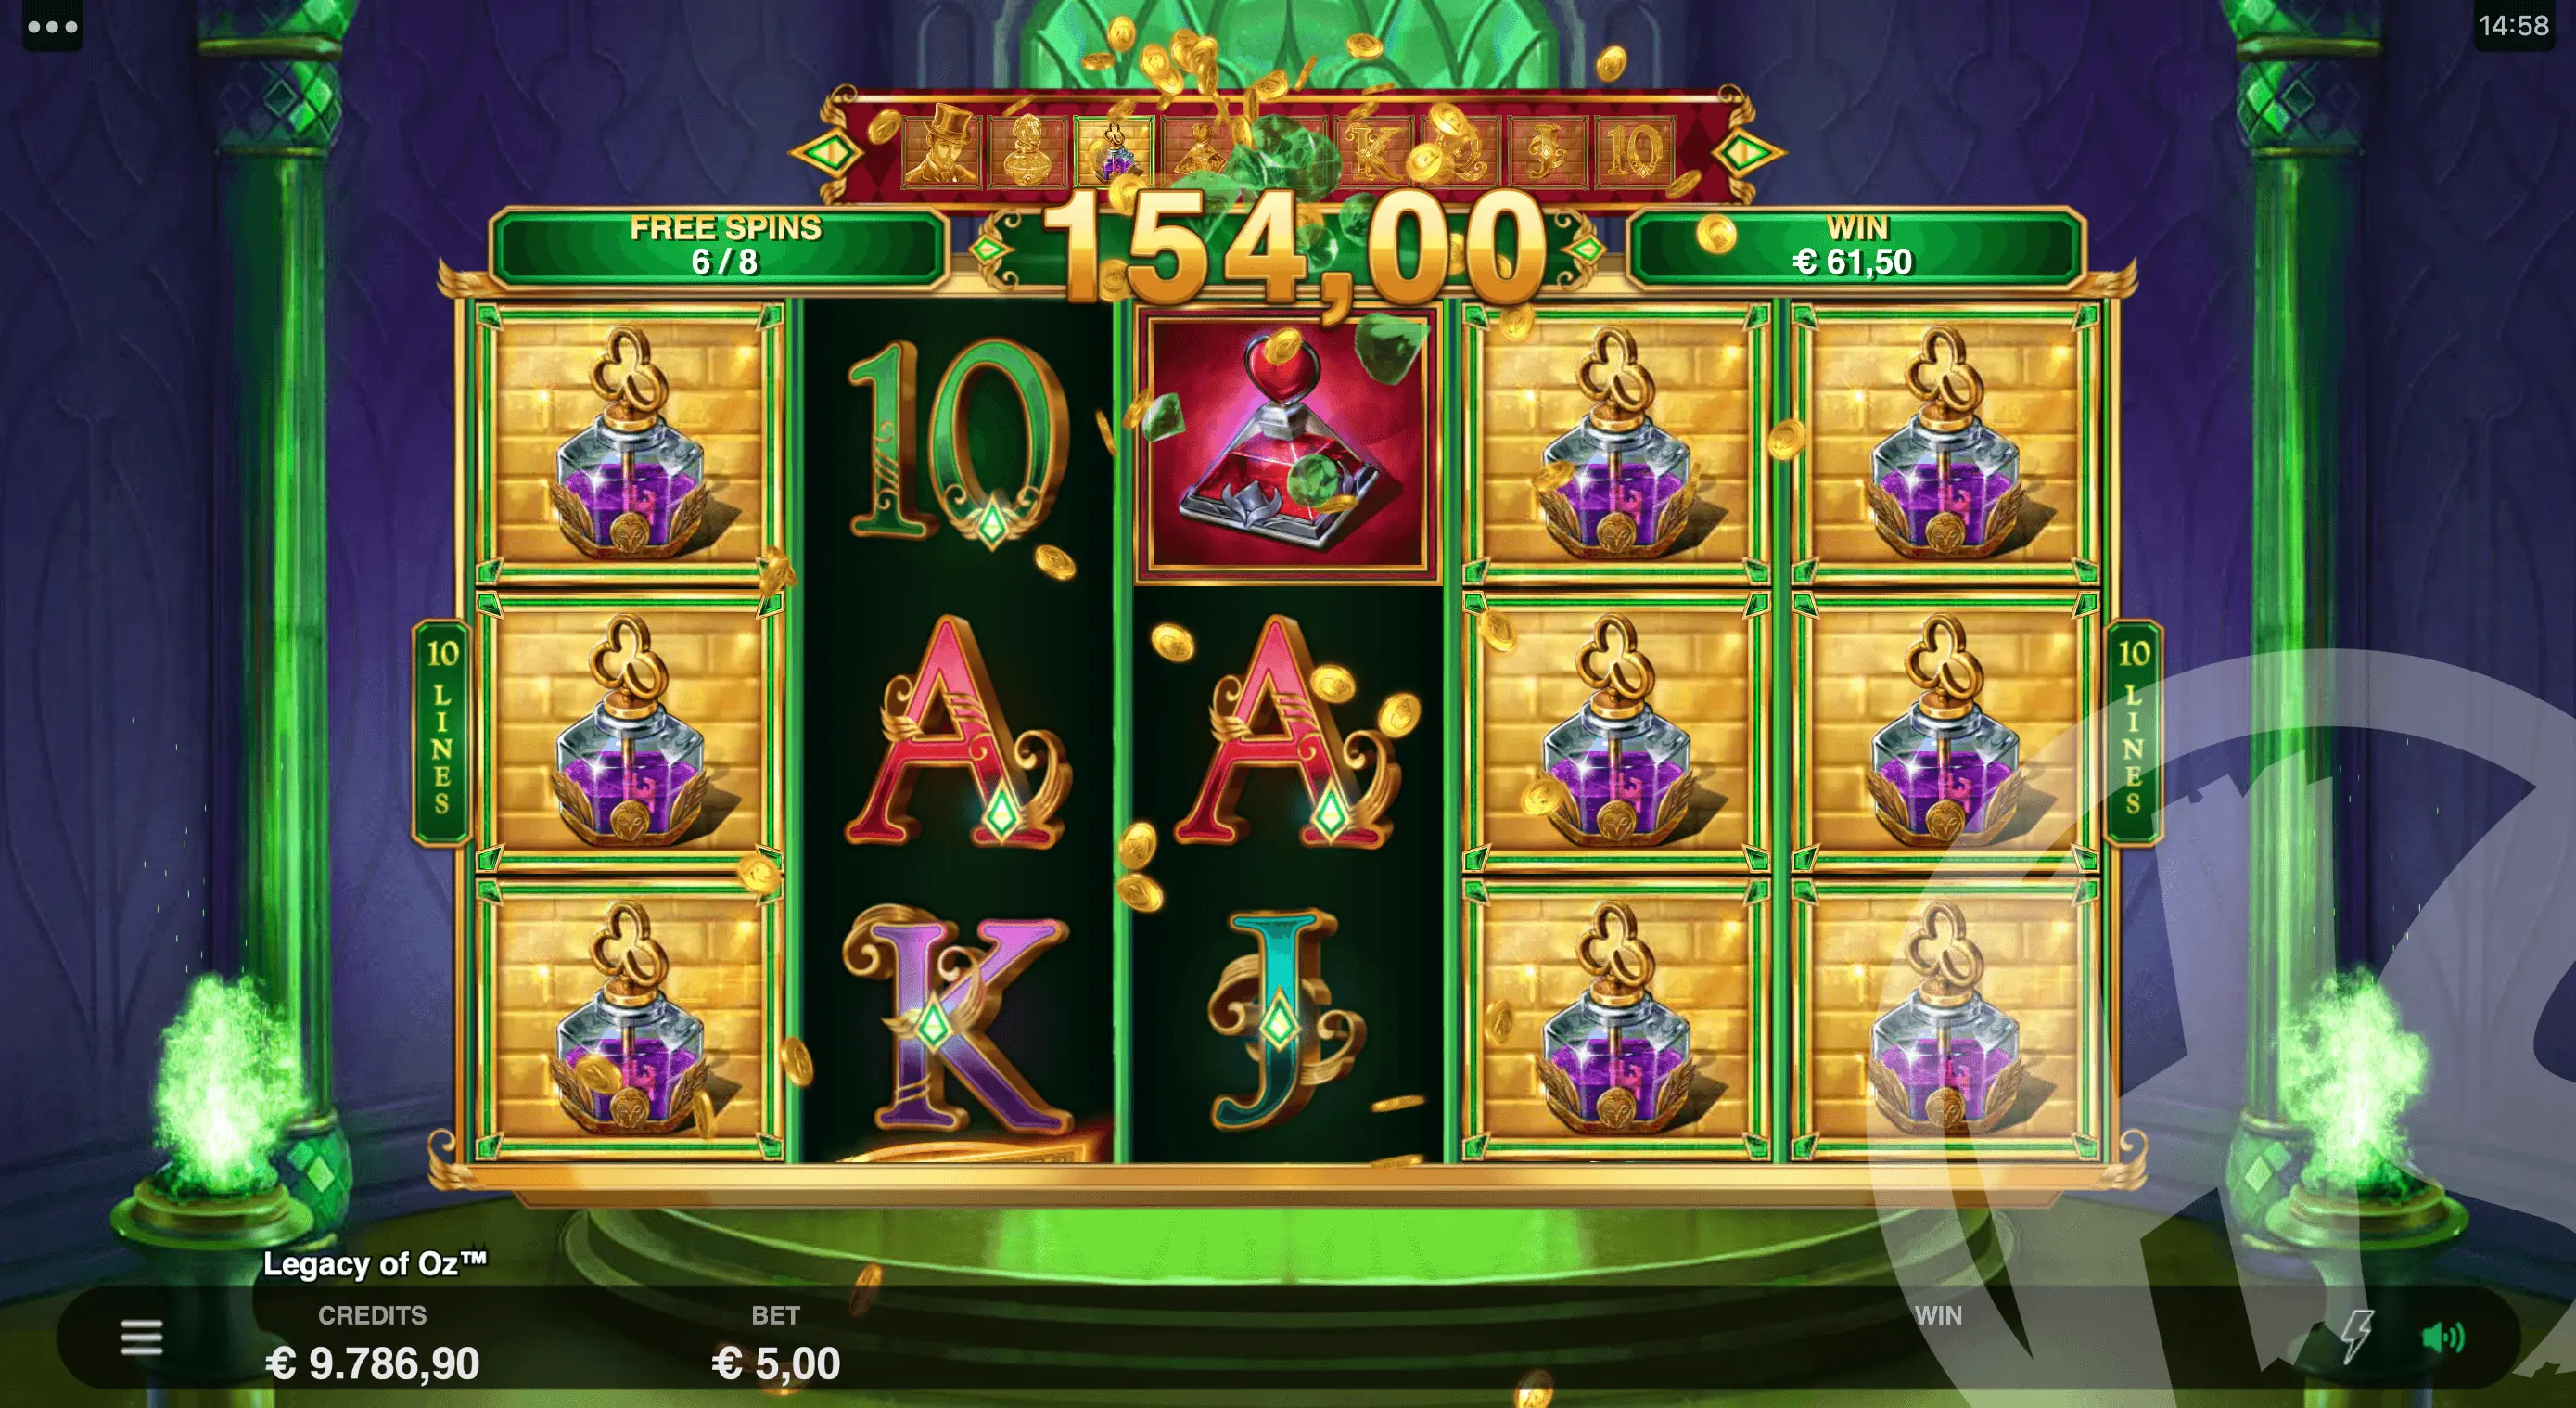 Legacy of Oz Free Spins